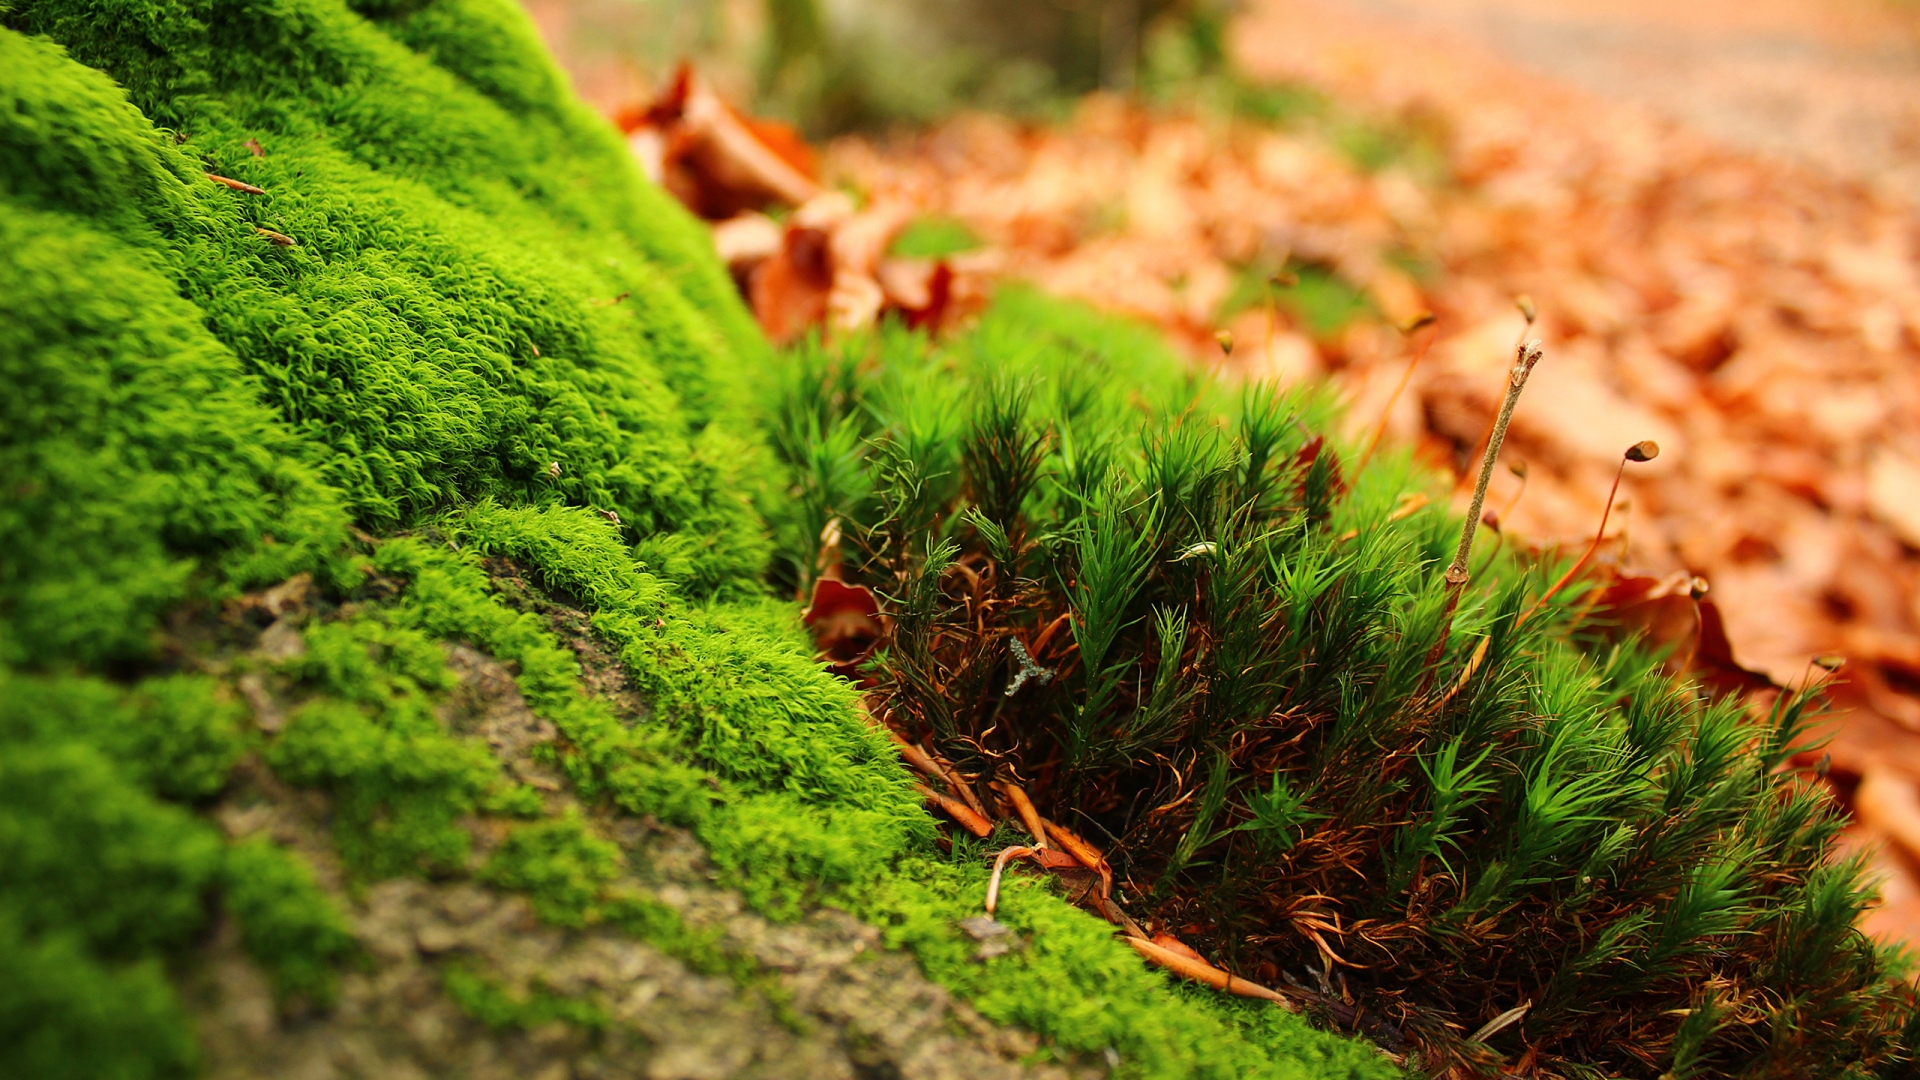 Amazing Moss for 1920 x 1080 HDTV 1080p resolution